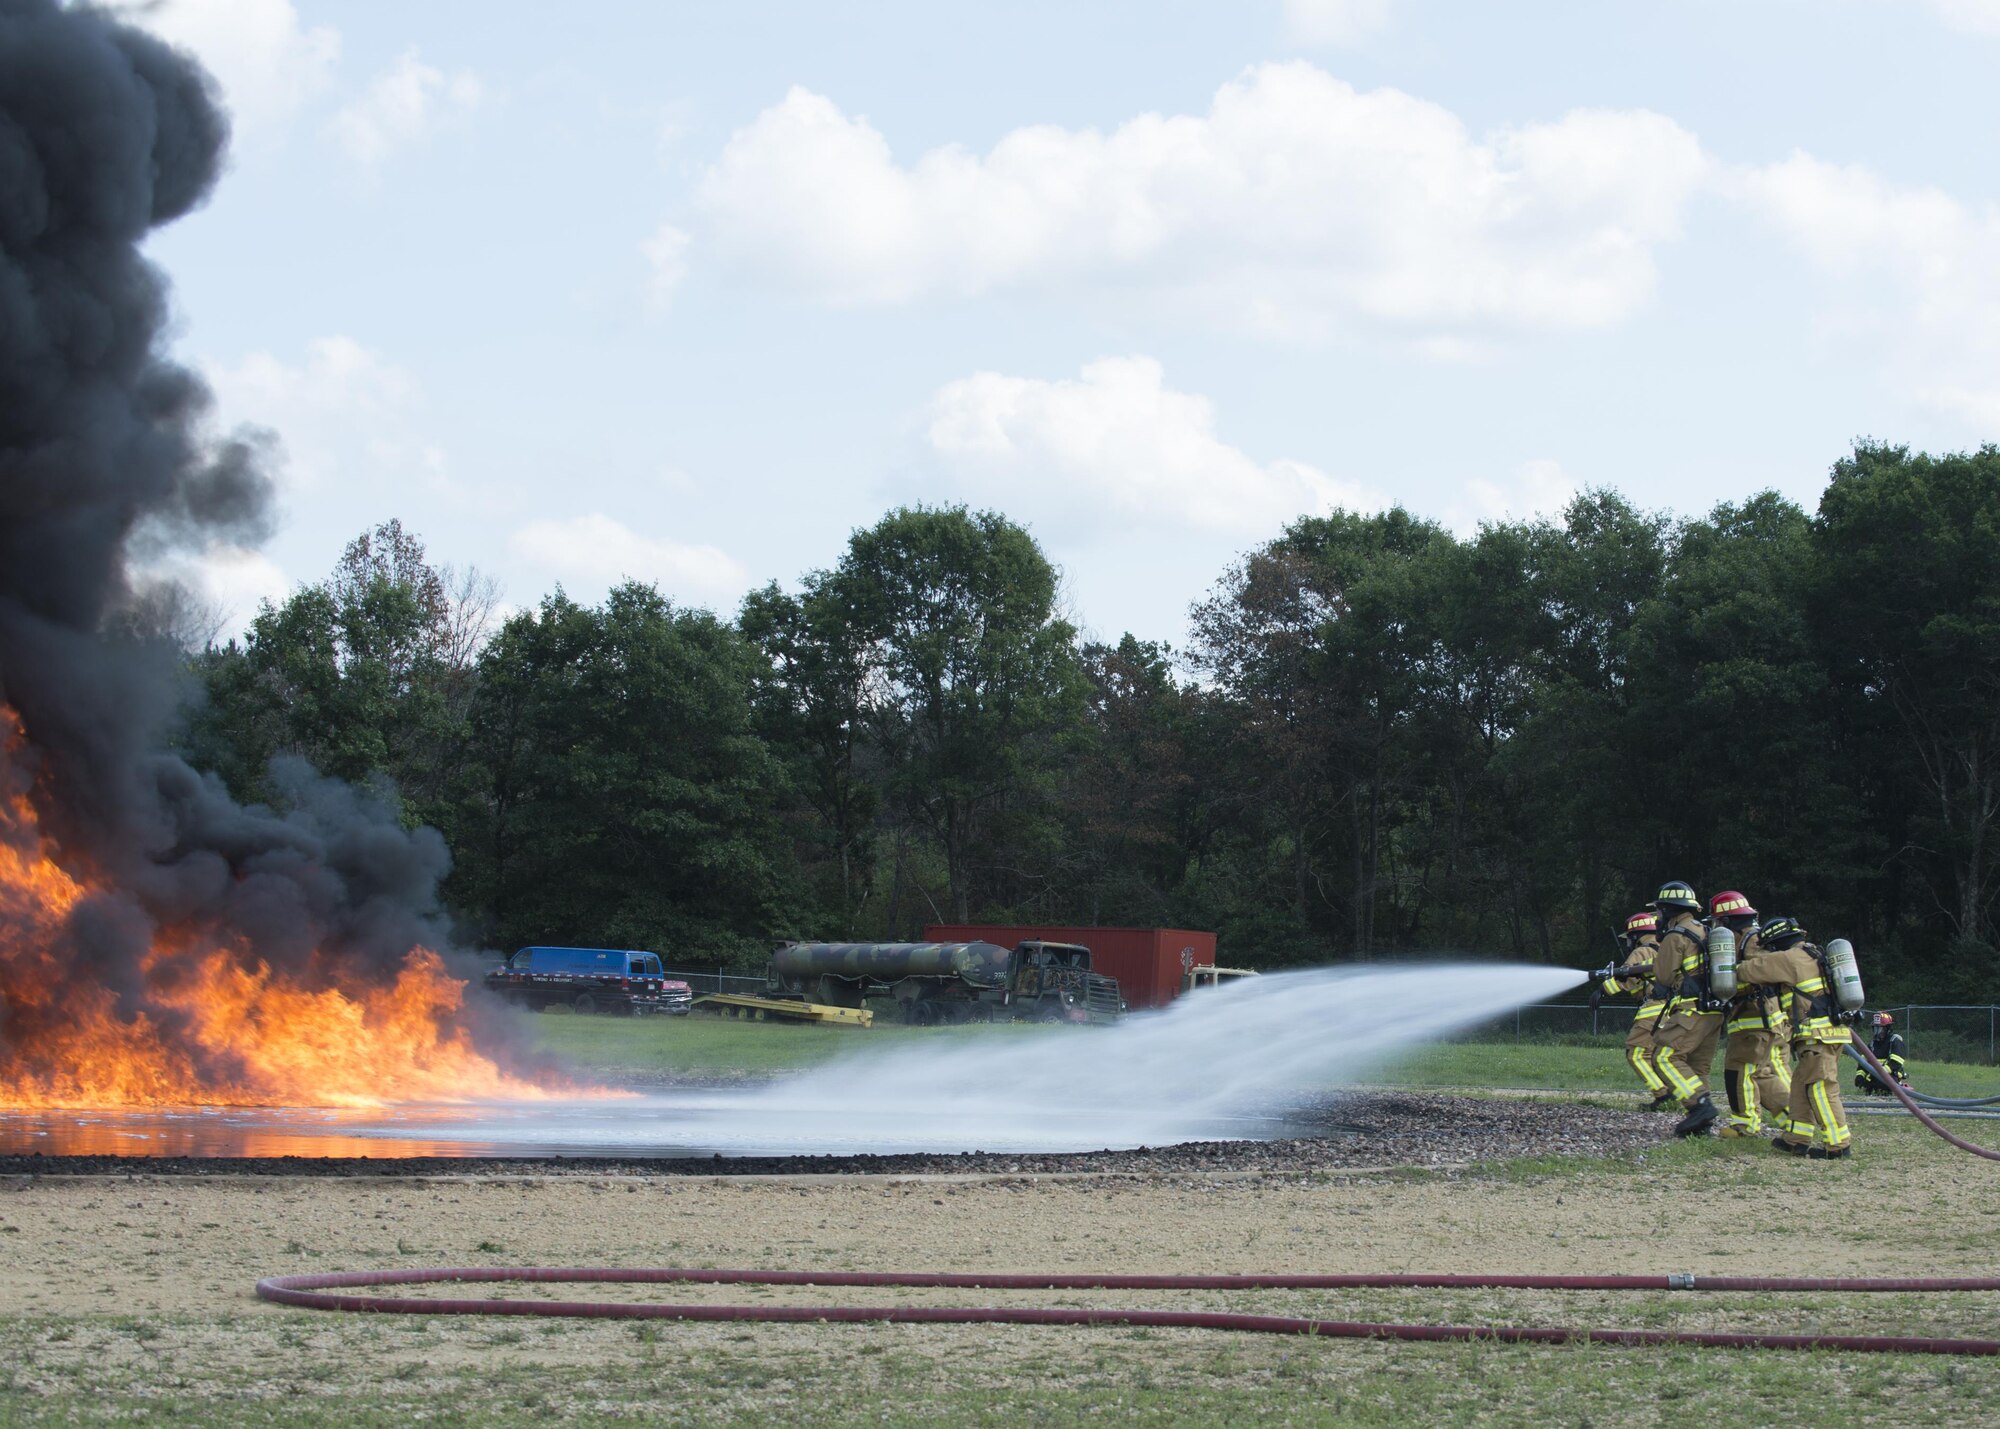 Air Force Reserve firefighters extinguish a fuel fire during exercise Patriot Warrior, Aug. 18, 2016, Sparta/Fort McCoy Airport, Wis. Patriot Warrior allows Air Reserve fire fighting units from throughout the U.S. to train together and learn from professionals throughout the career field in a deployment-style environment. (U.S. Air Force Photo/ Tech. Sgt. Nathan Rivard)